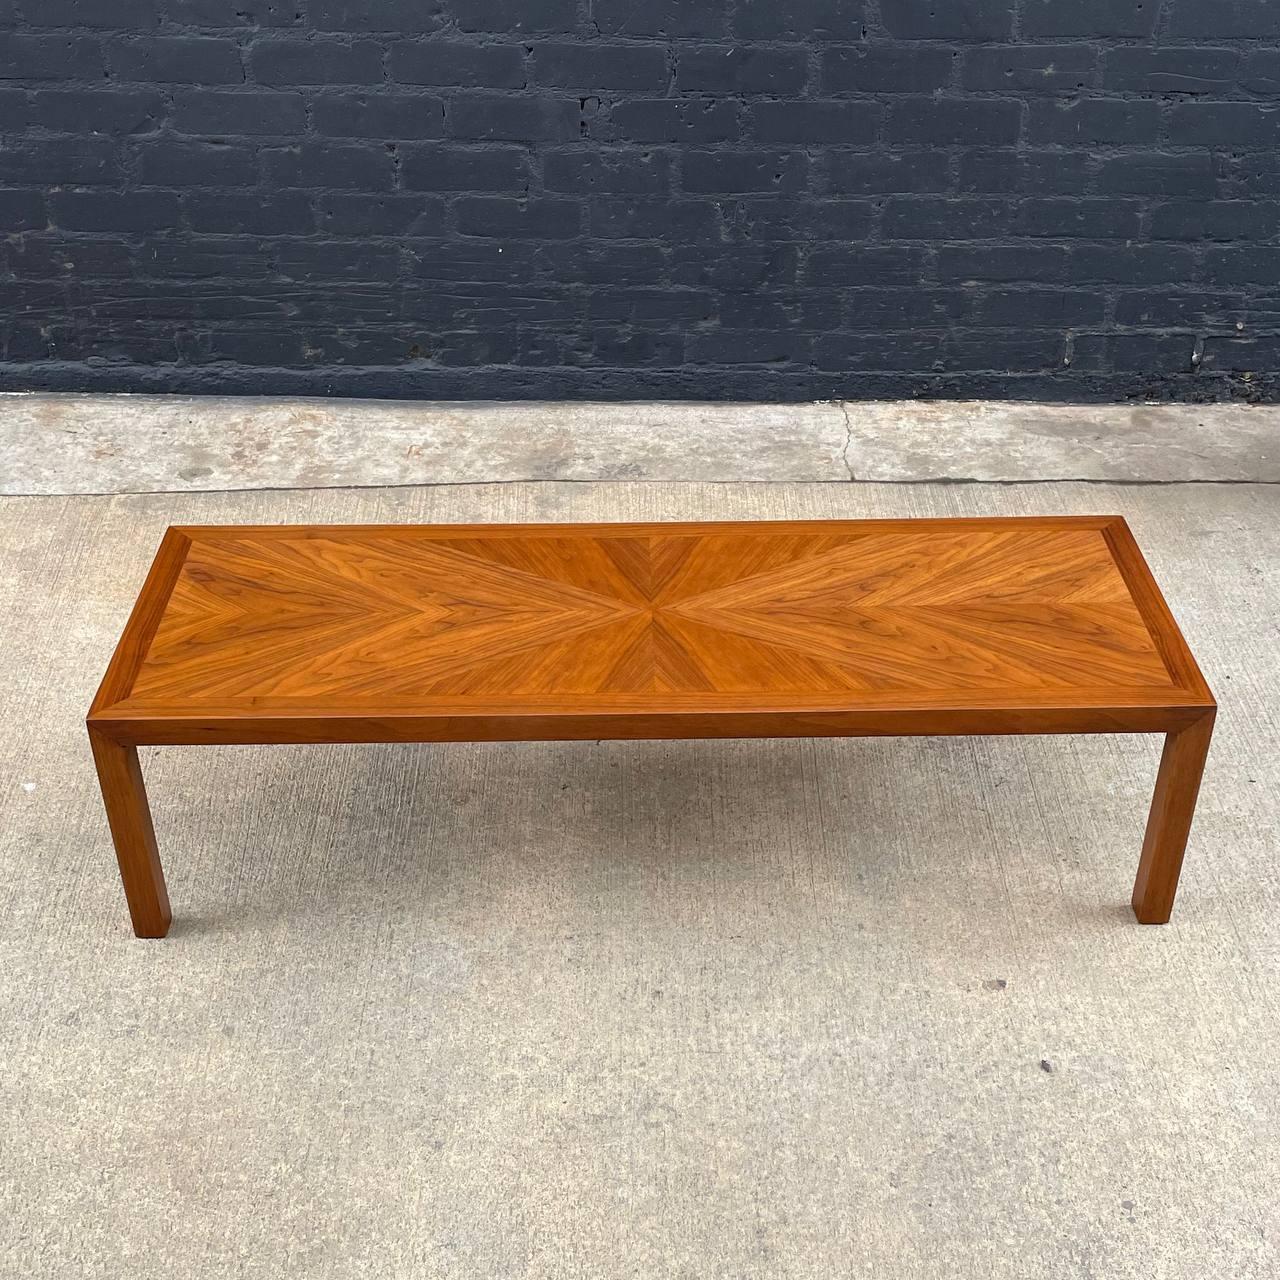 Newly Refinished - Mid-Century Modern Walnut Coffee Table by Lane In Excellent Condition For Sale In Los Angeles, CA